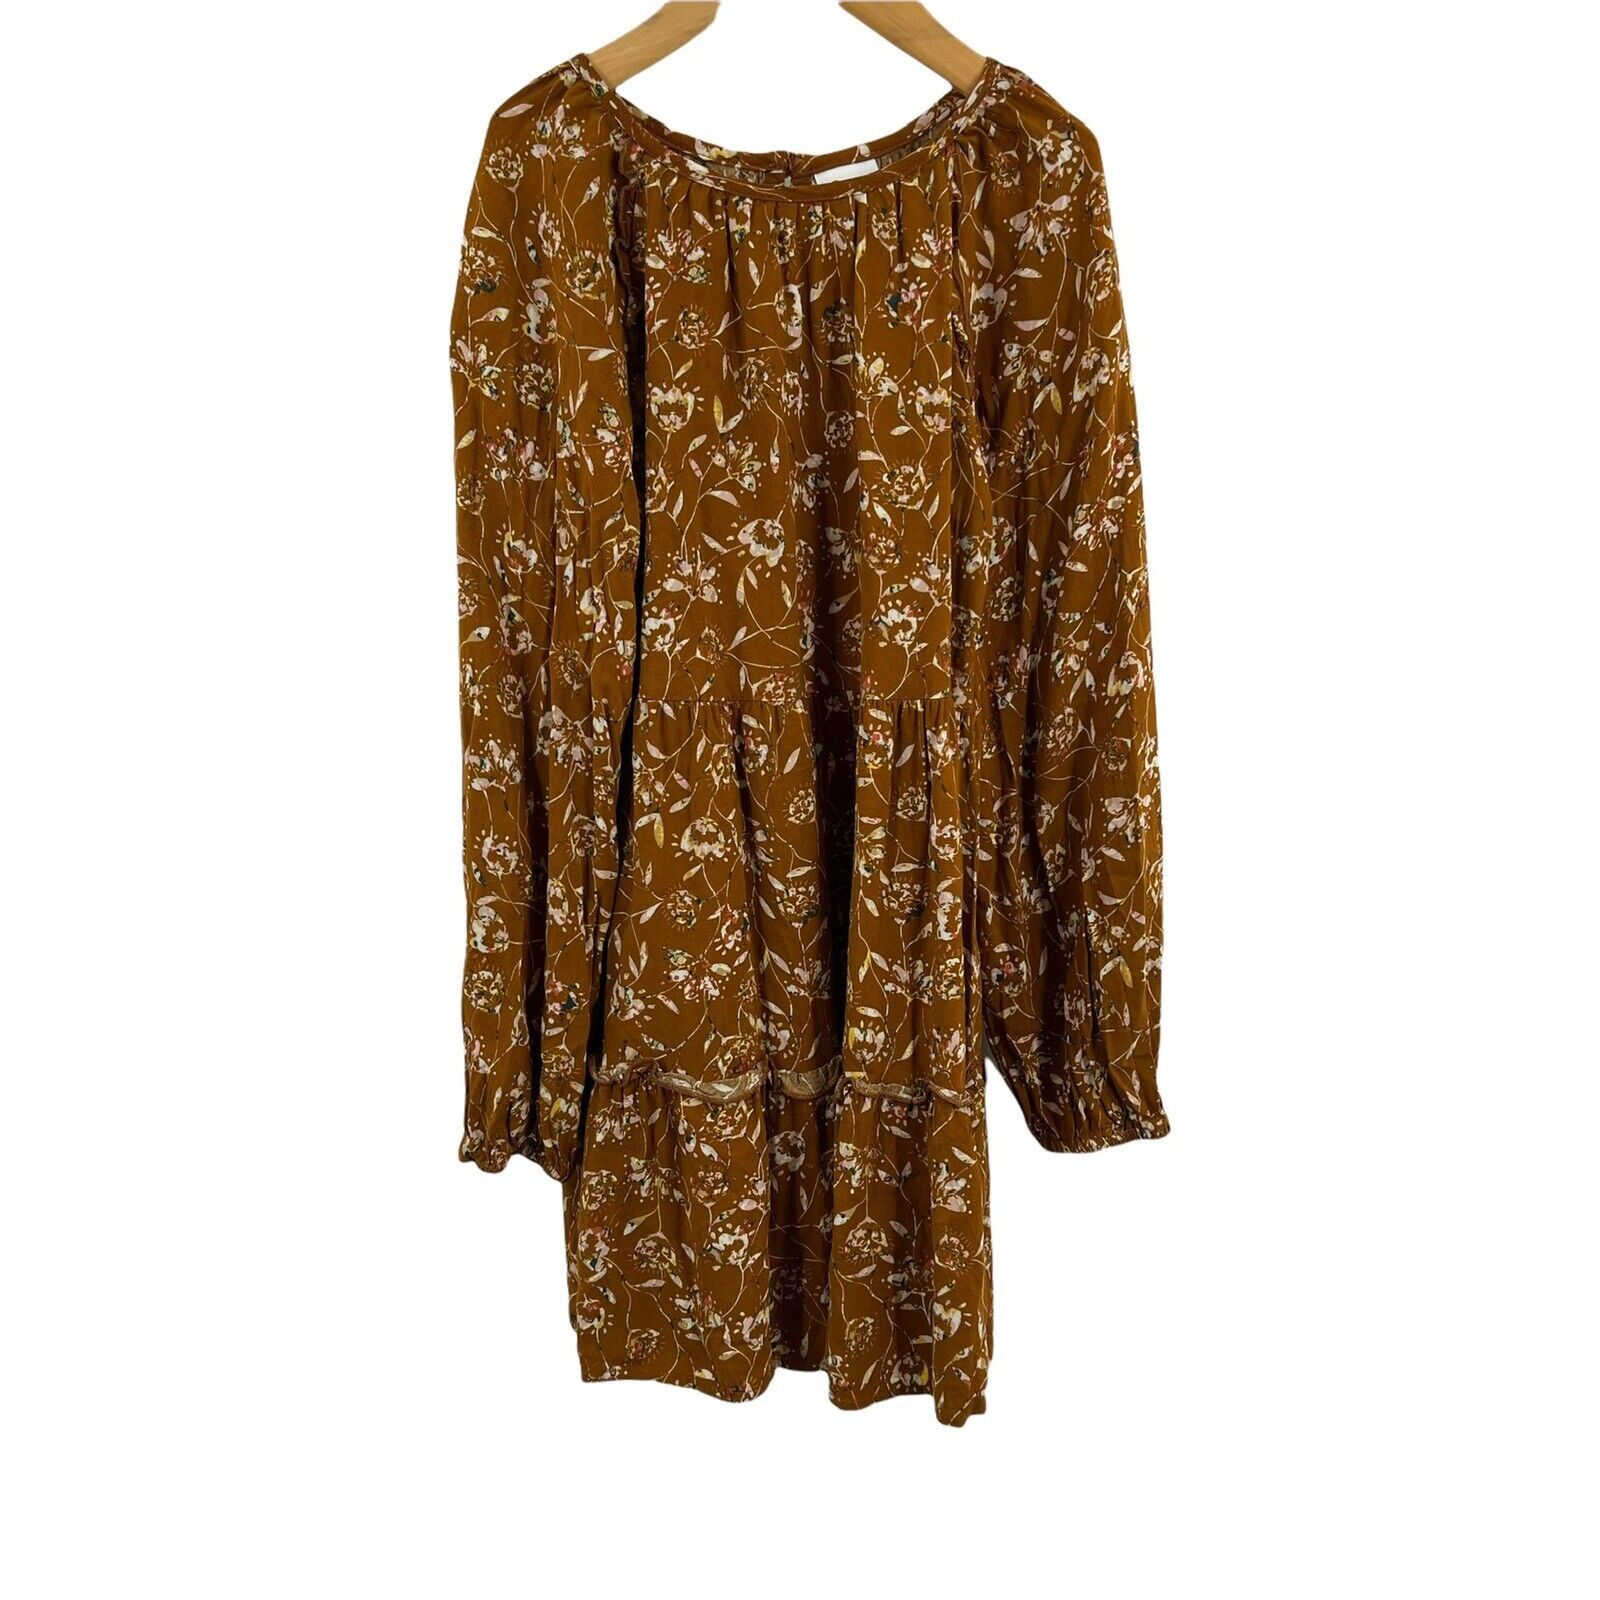 Primary image for Art Class Brown Floral Long Sleeve Boho Dress Size Medium